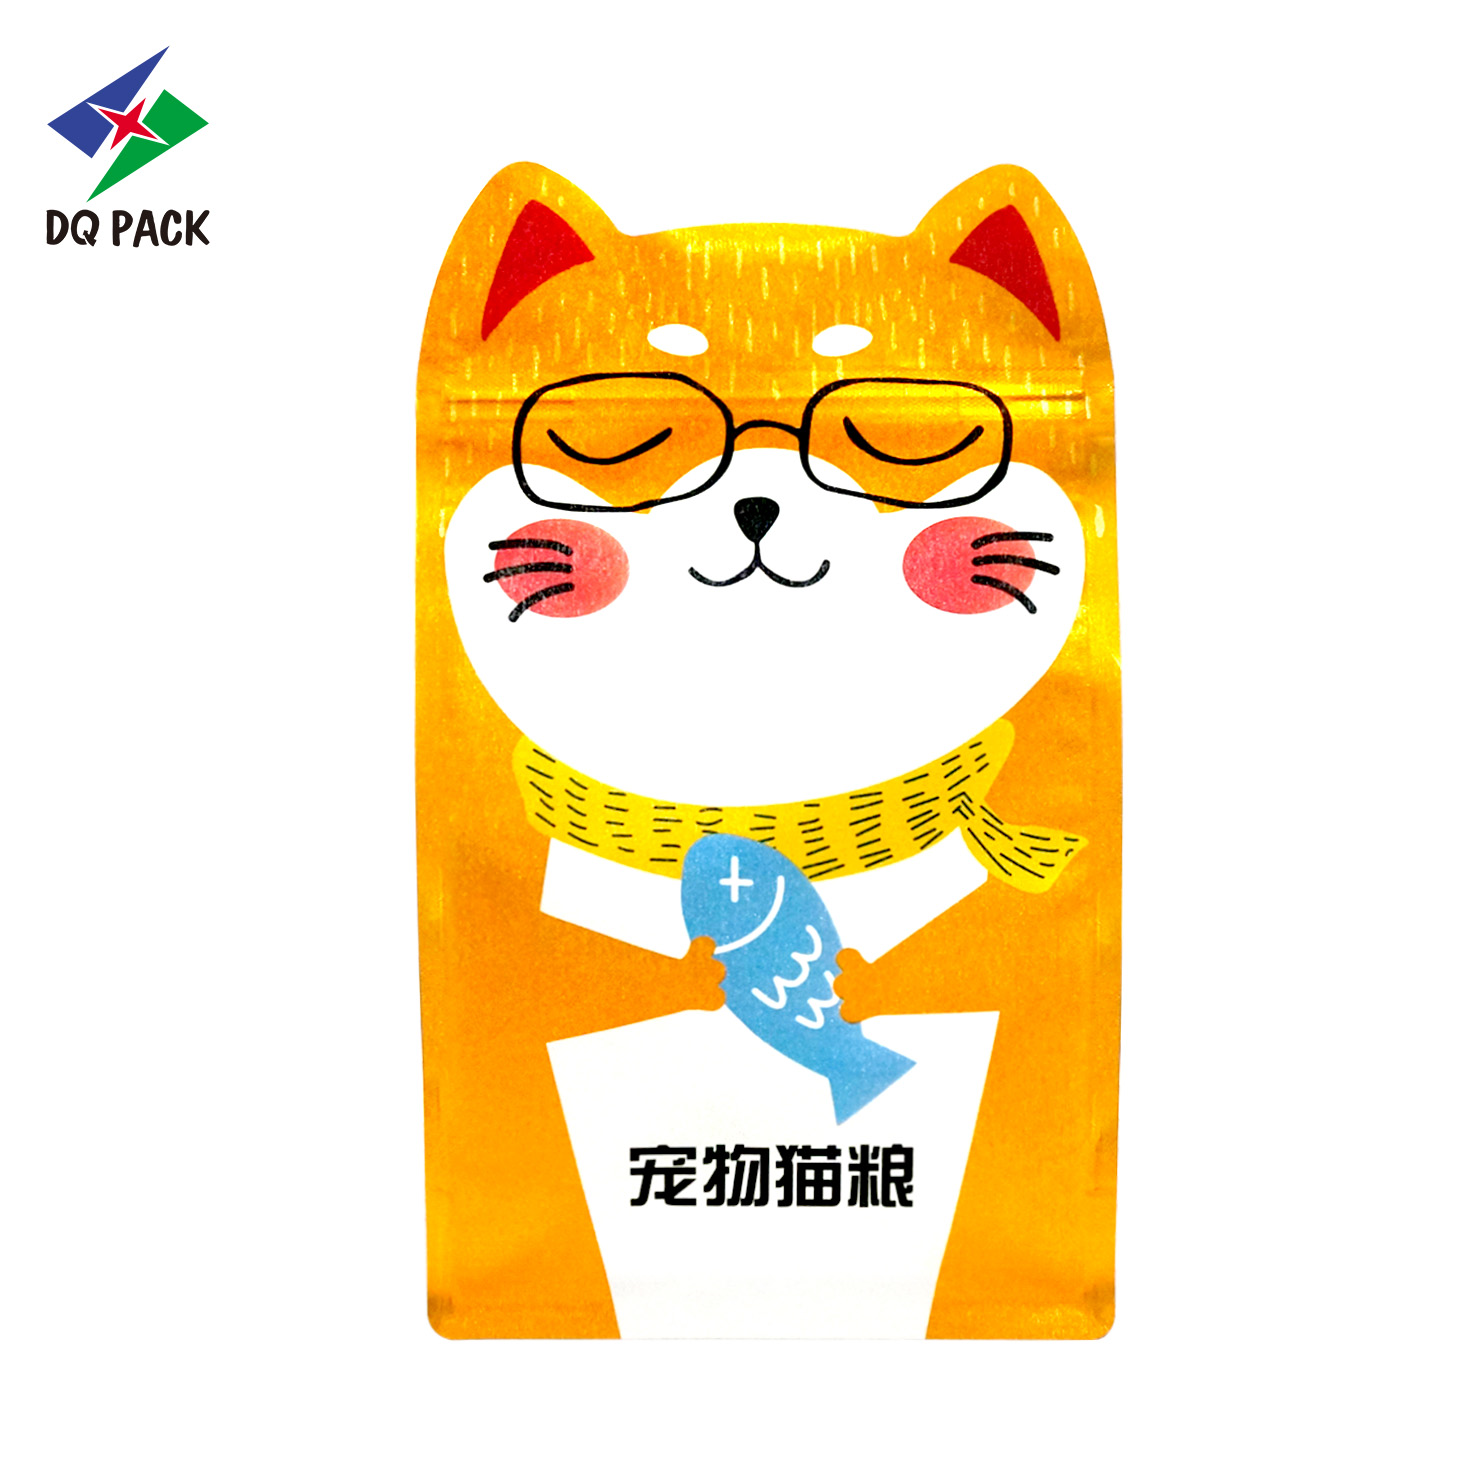 DQPACK customized plastic bags for pet food